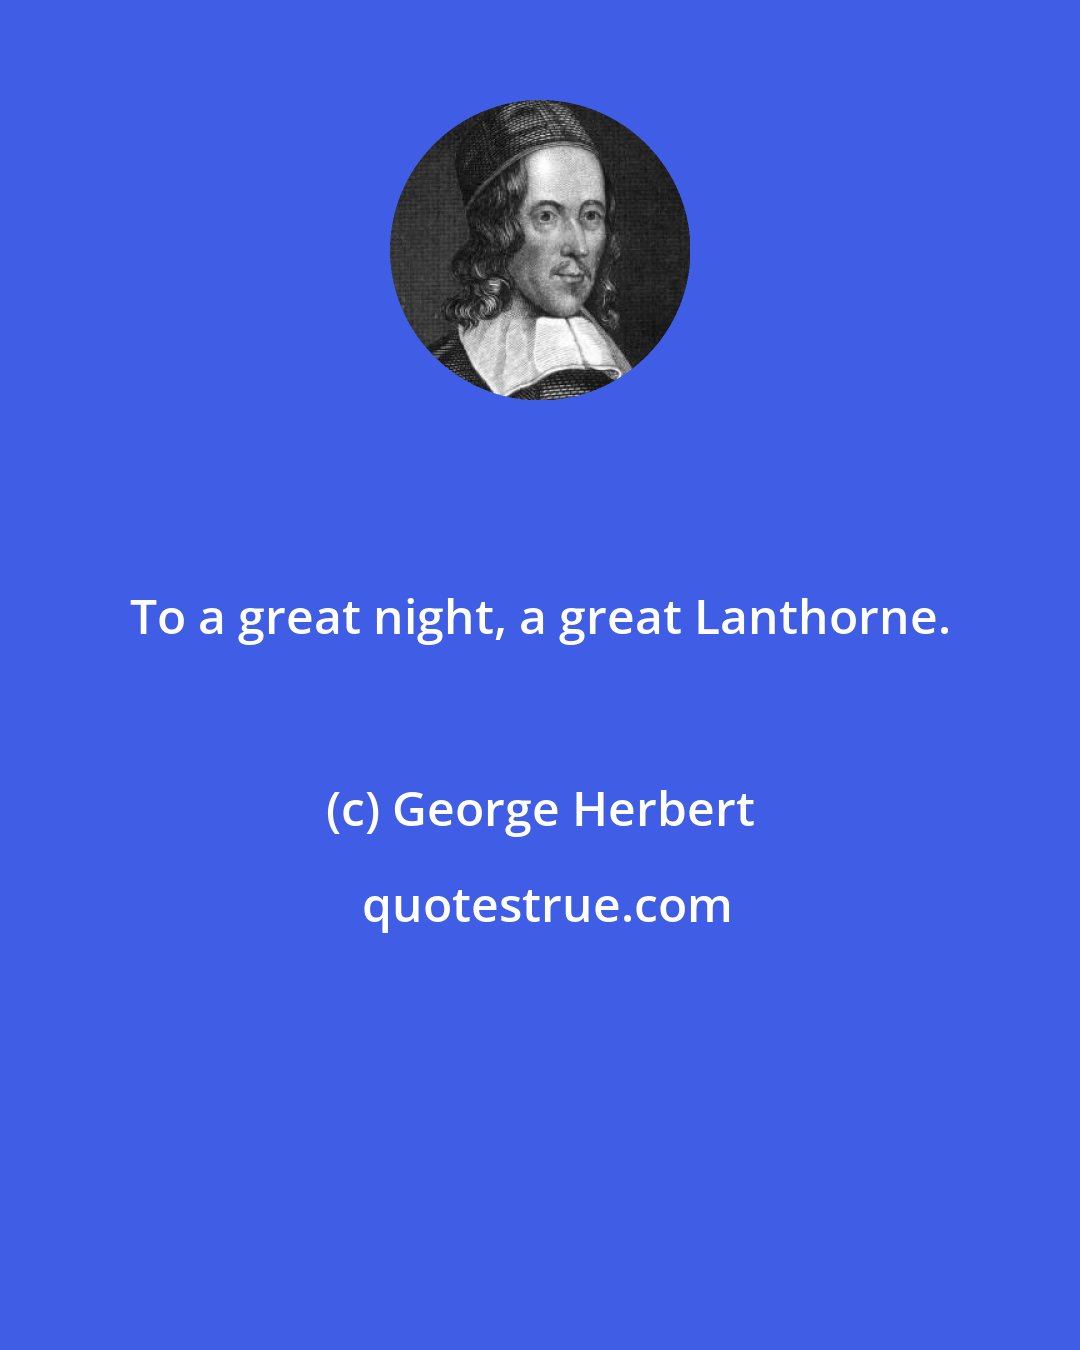 George Herbert: To a great night, a great Lanthorne.